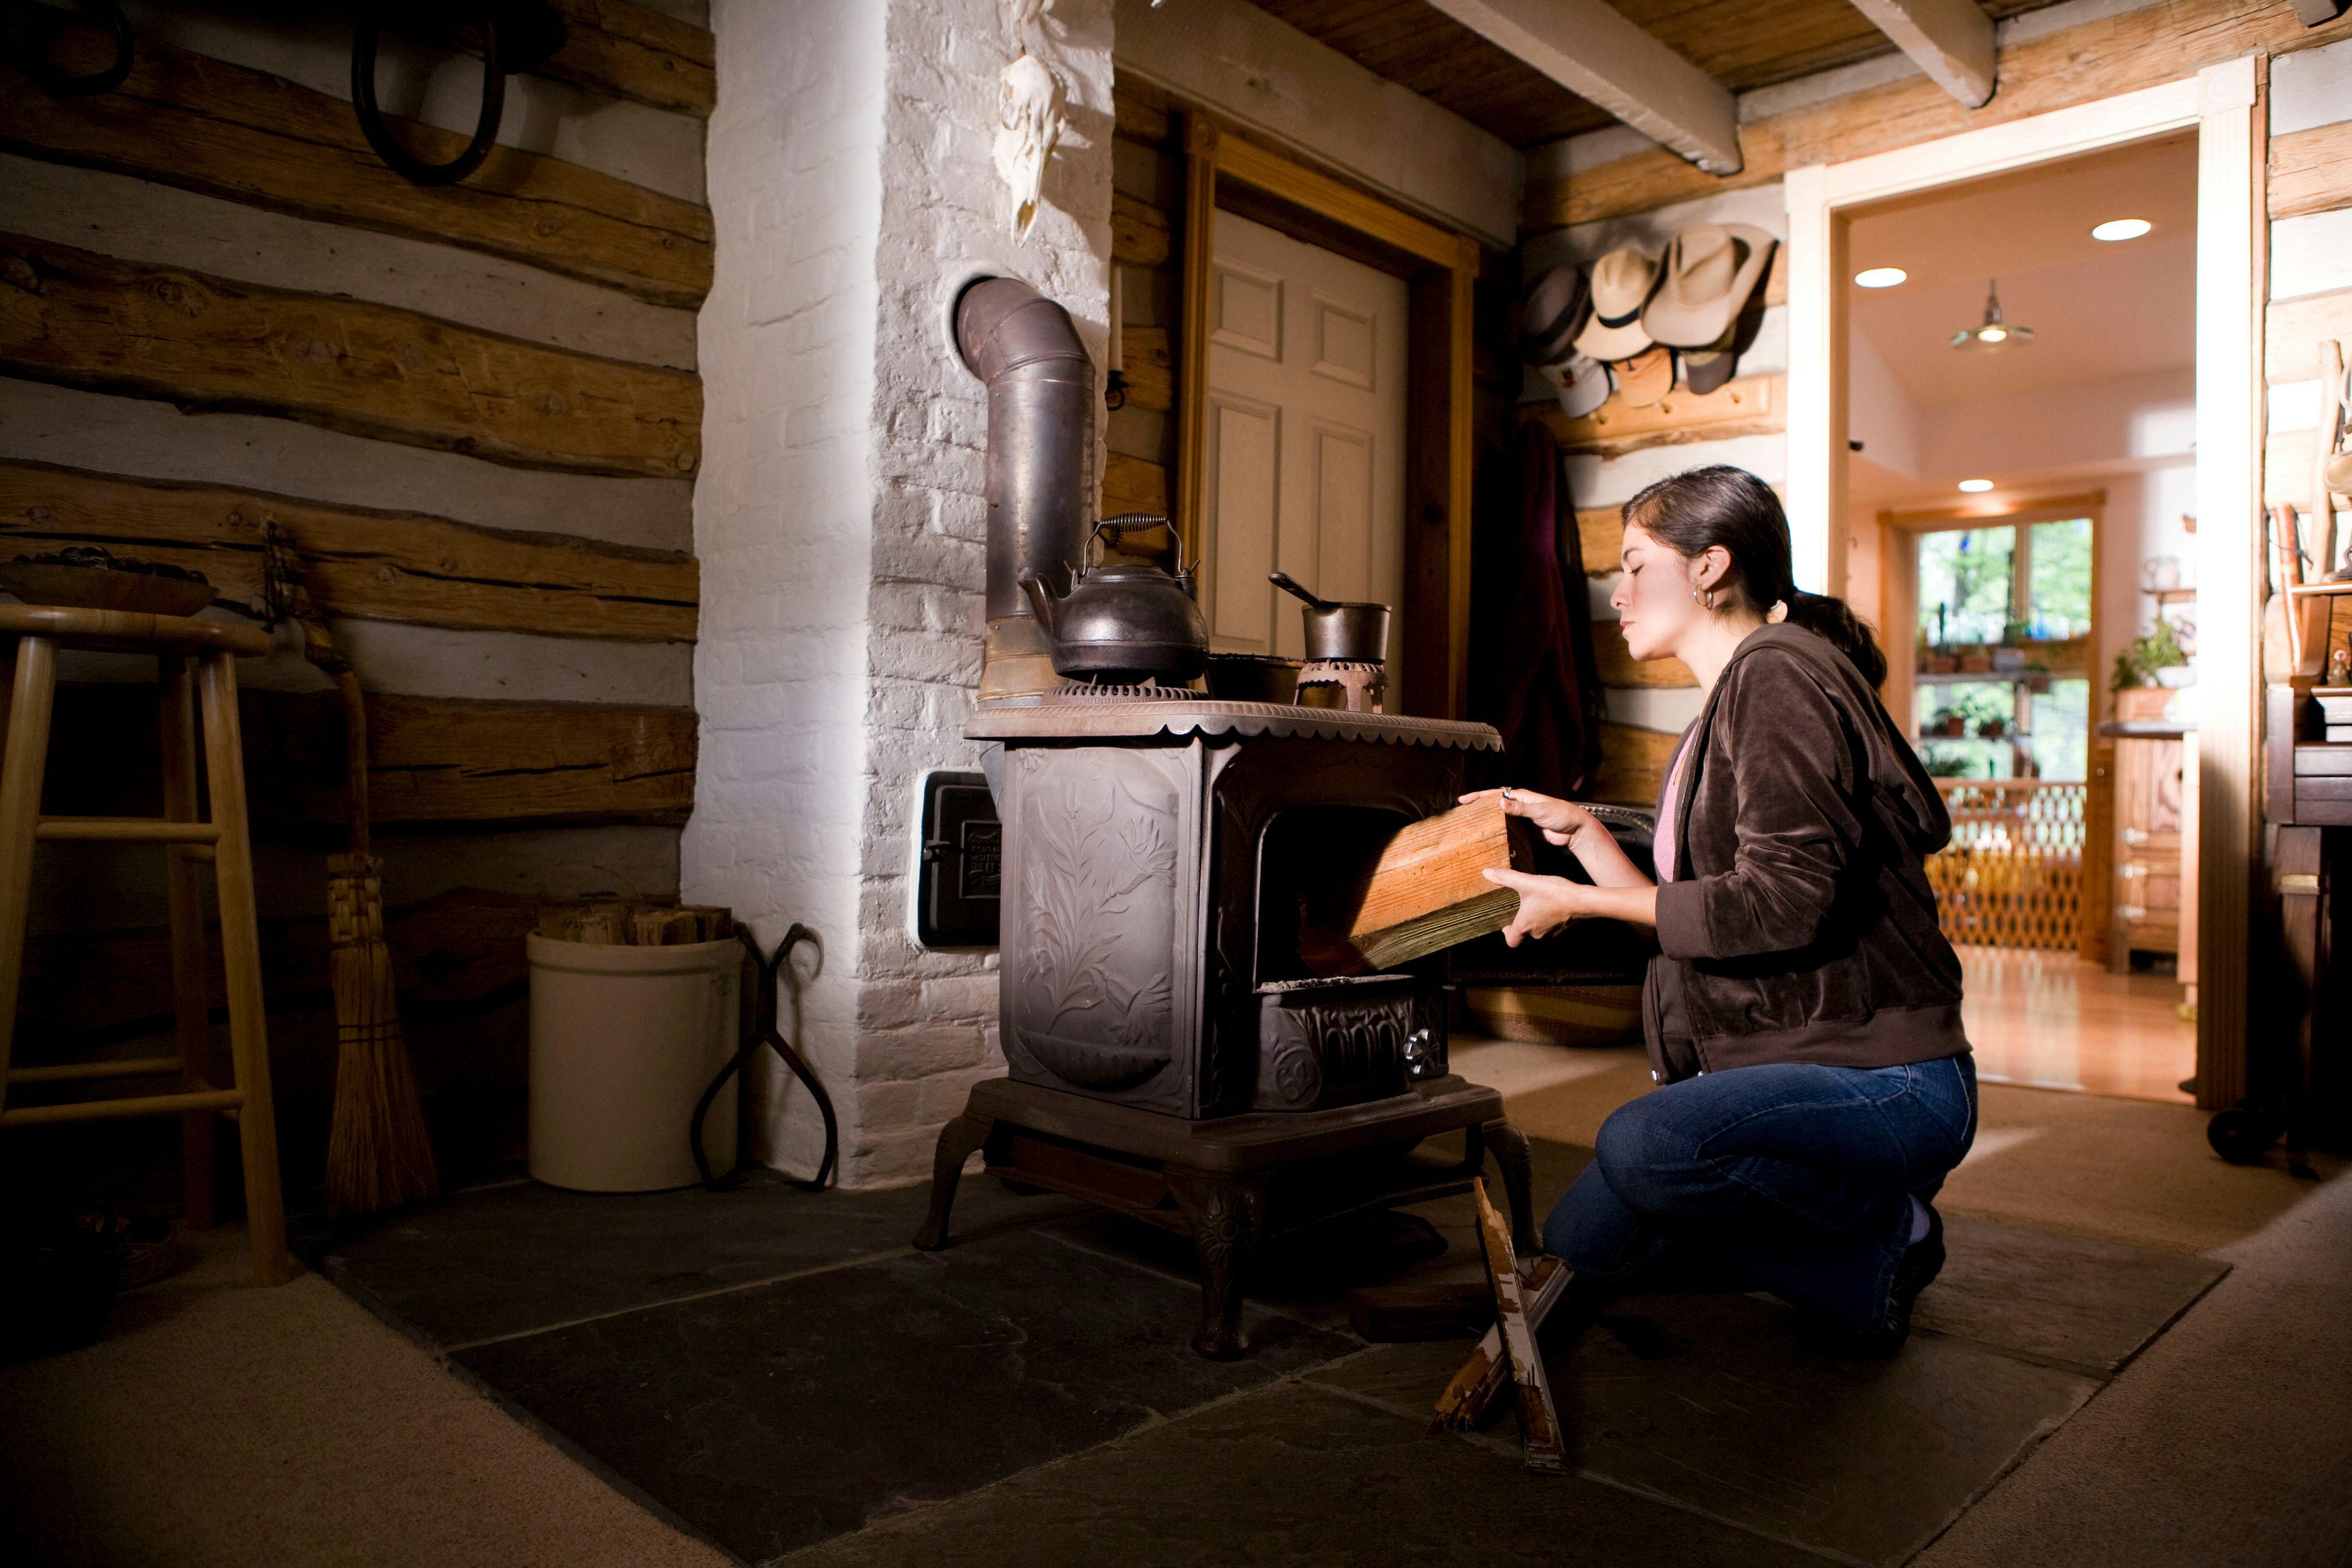 This home’s interior, though beautiful, houses a potential hazard on many levels, therefore, special care need be taken in order to safely operate this wood-burning stove, for not only does it generate a terrific amount of heat, it does so using flame, rather than electricity, which is much more difficult to control. This woman was about to place what appears to be a piece or treated lumber into the stove as fuel.